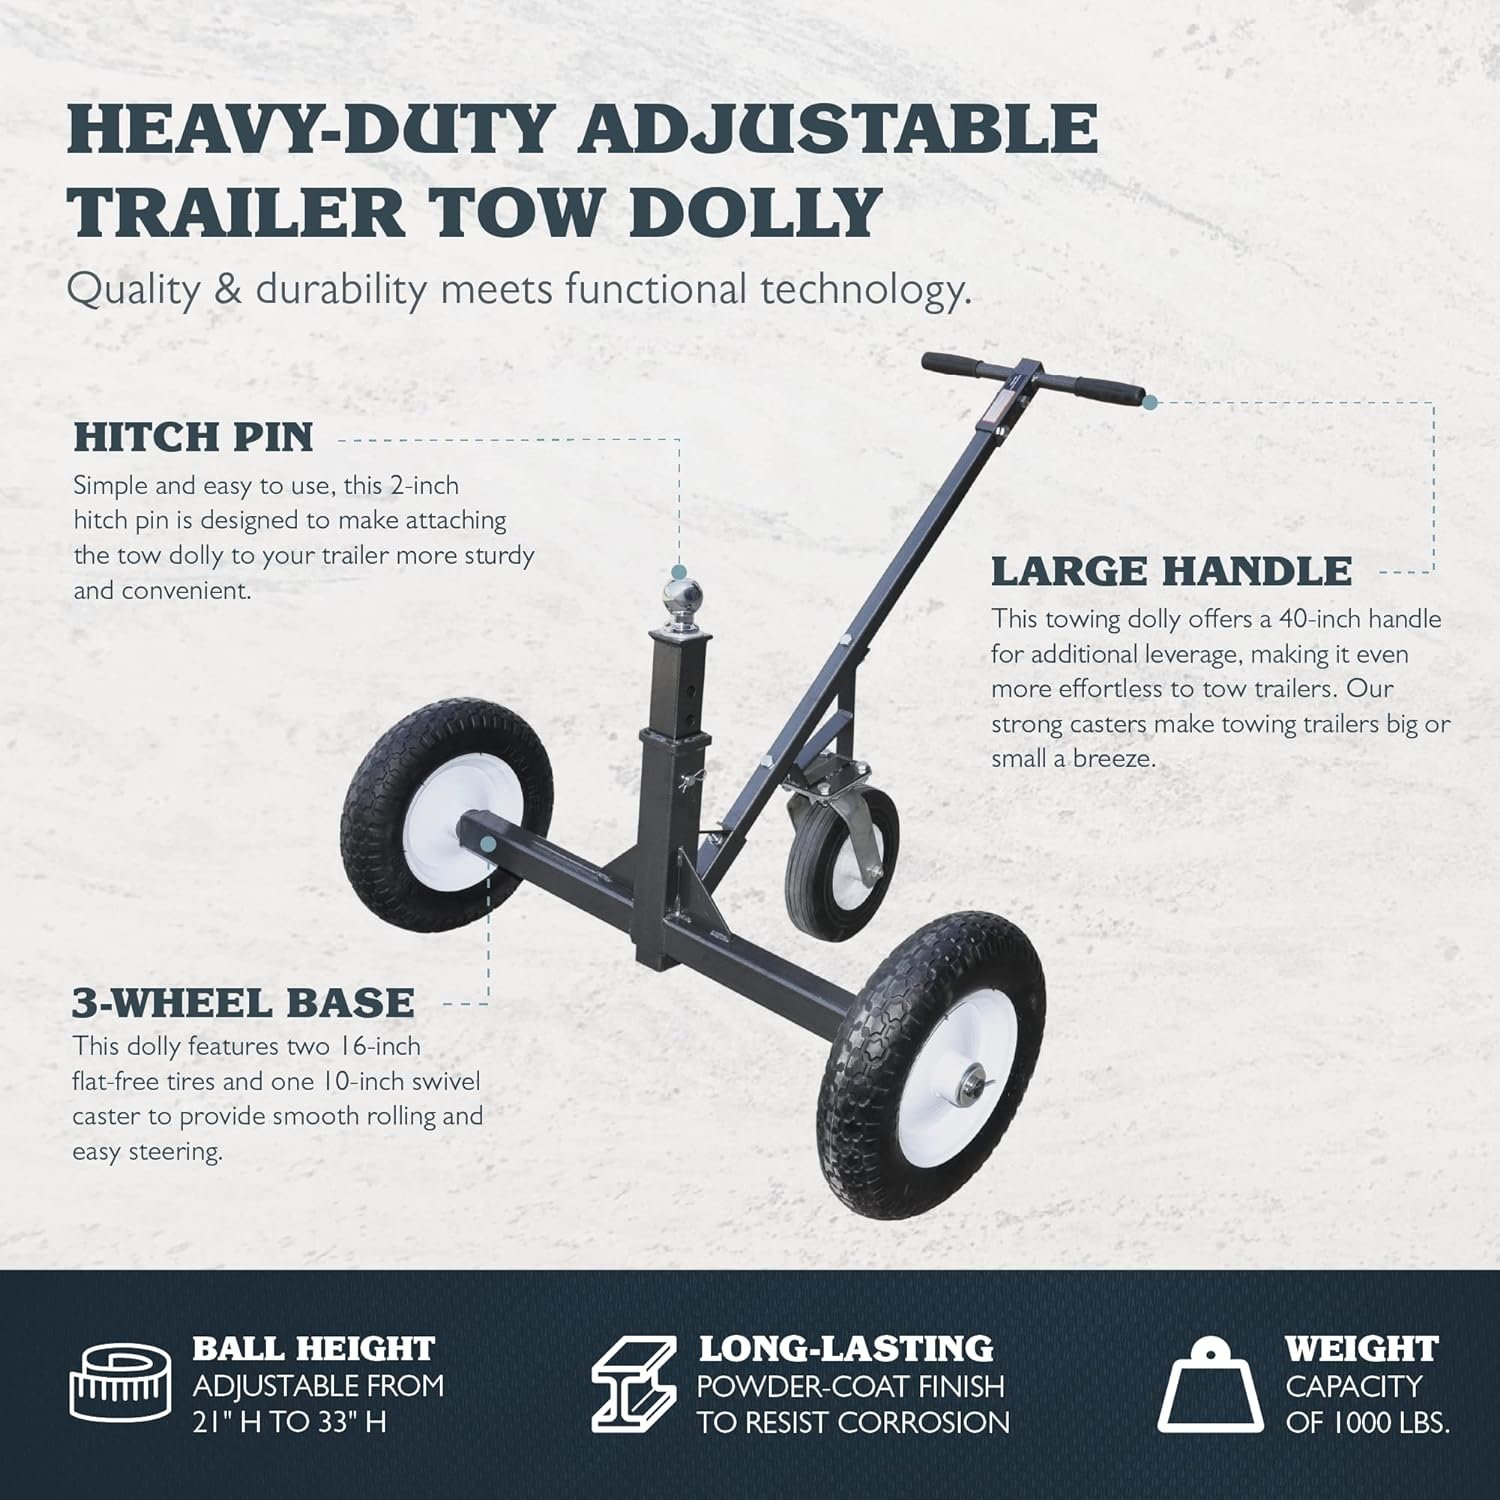 Tow Tuff TMD-1000C Trailer Dolly Adjustable 21" to 33" Max Weight 1000lbs Works with 2" Coupler or Larger New